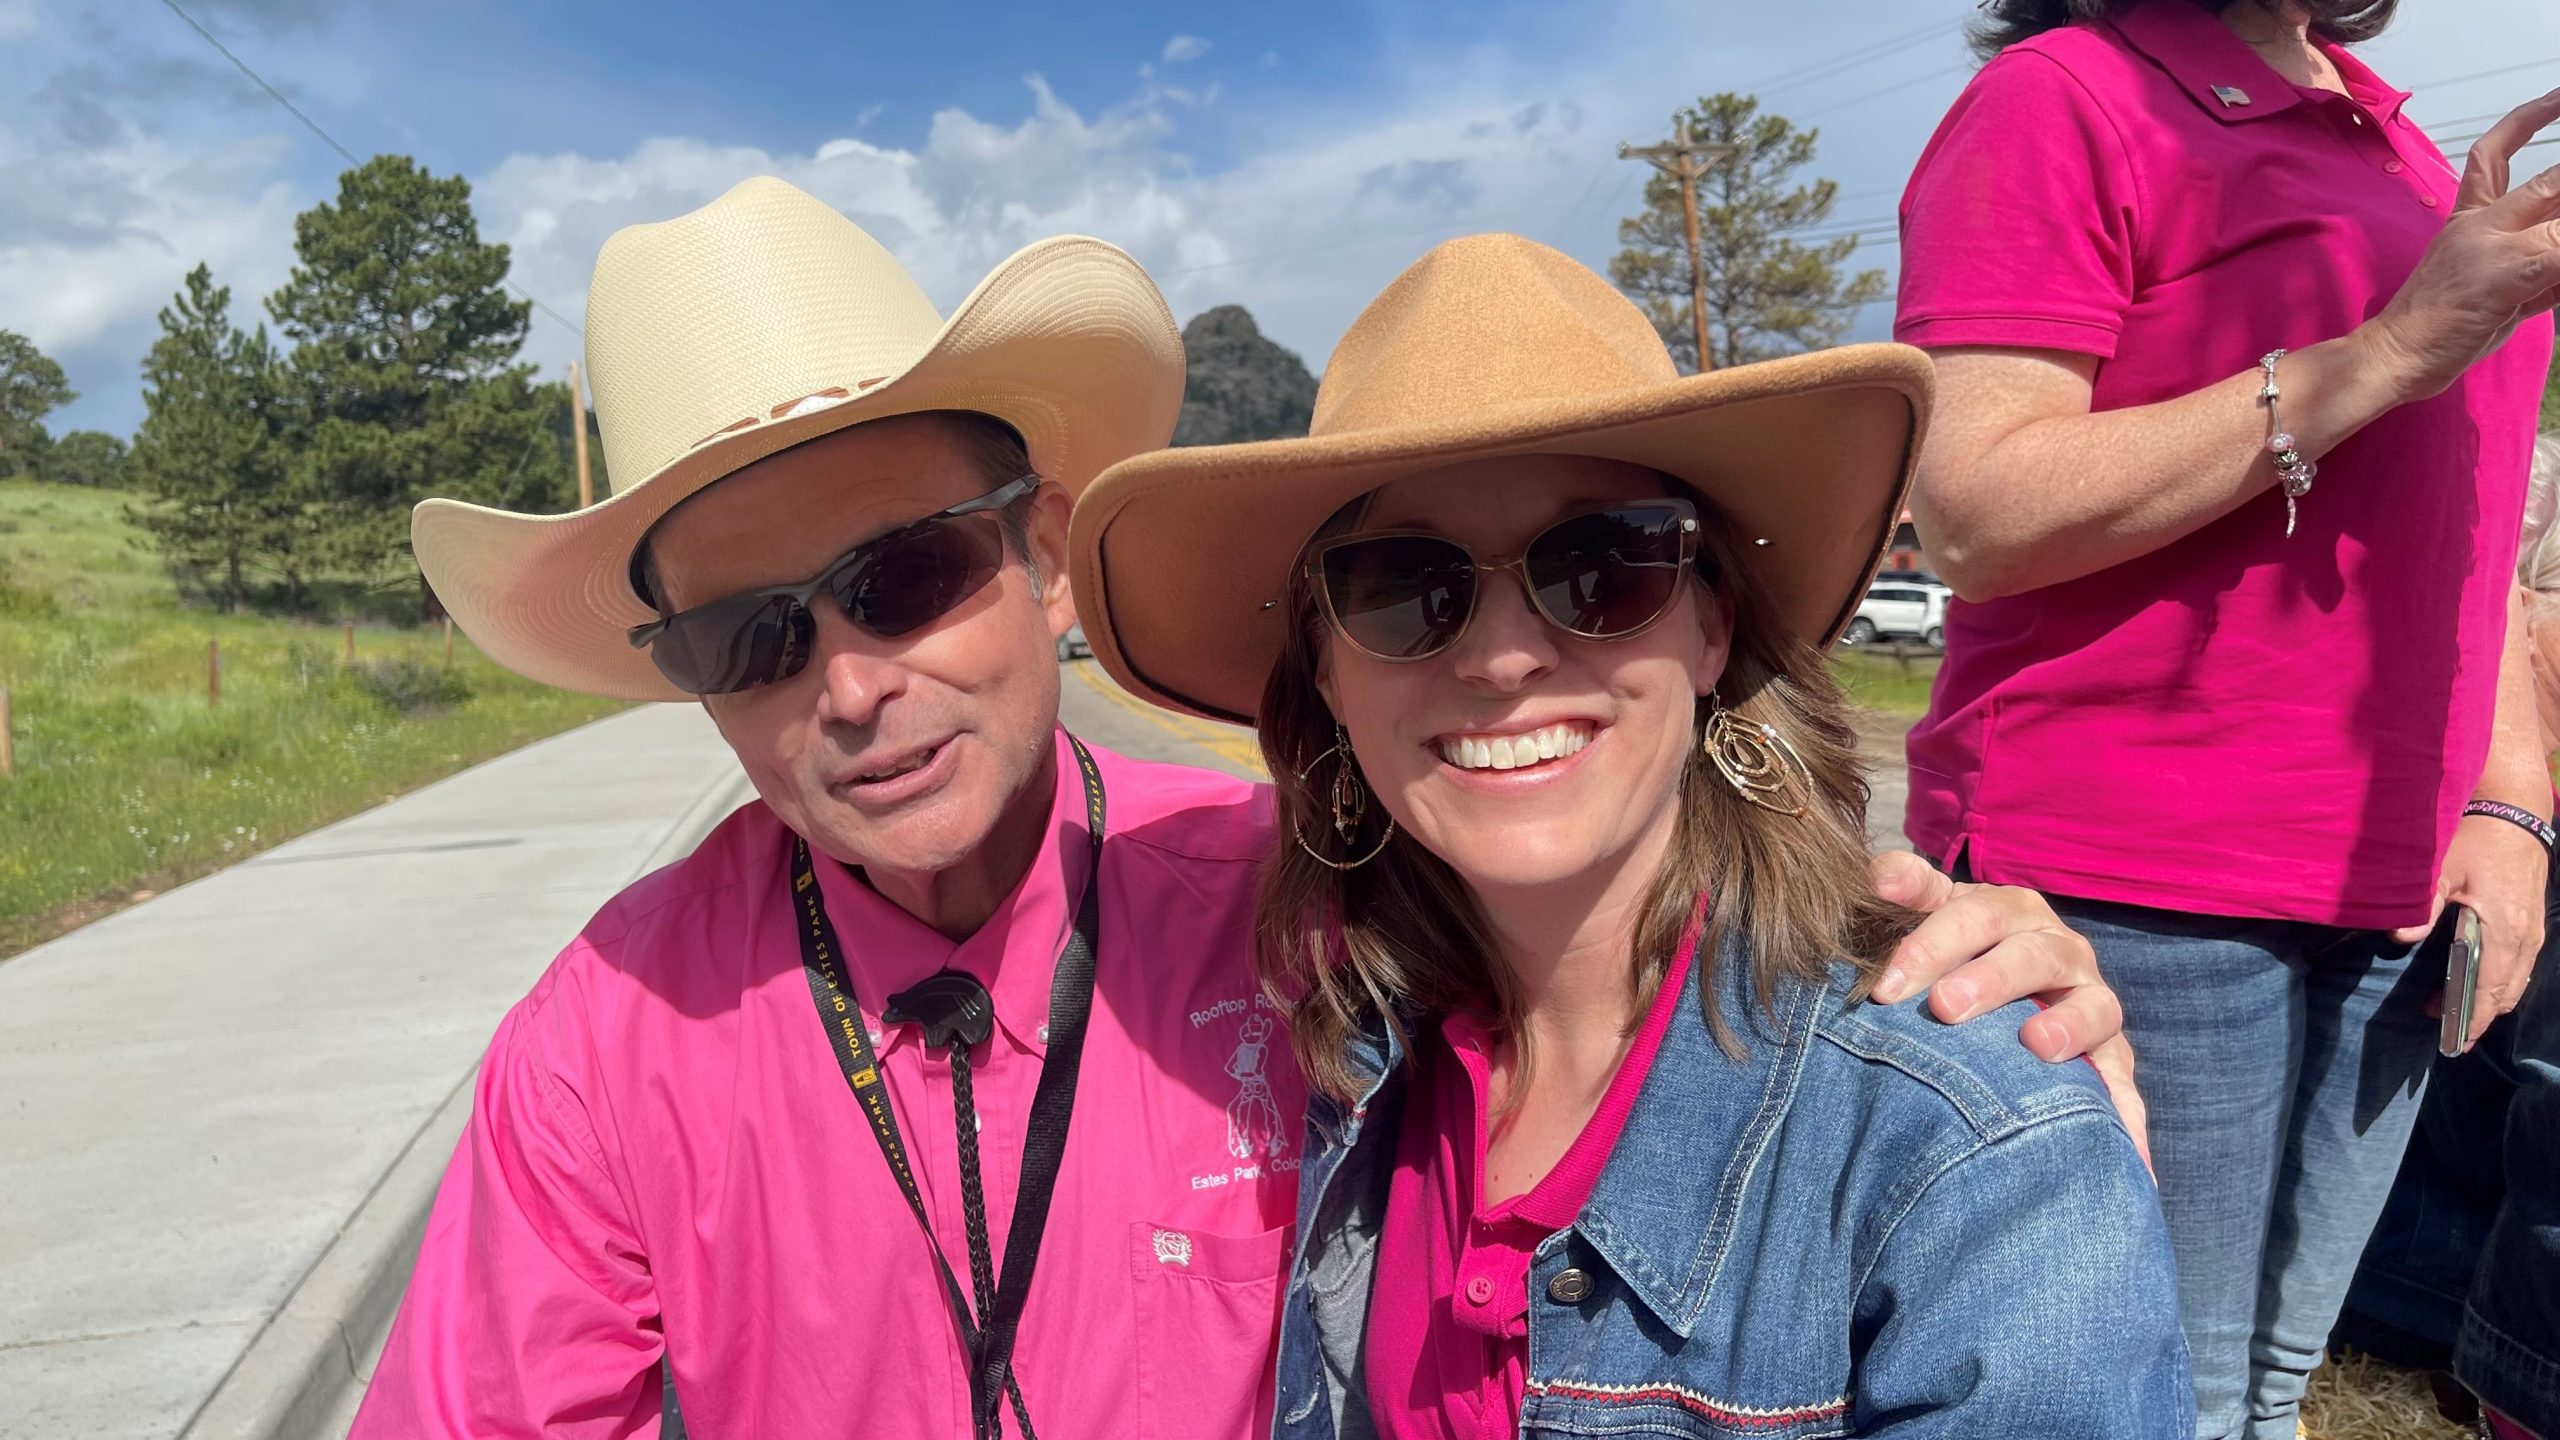 Two people wearing sunglasses and cowboy hats, both smiling and wearing pink shirts with black lanyards. They are outdoors on a sunny day.